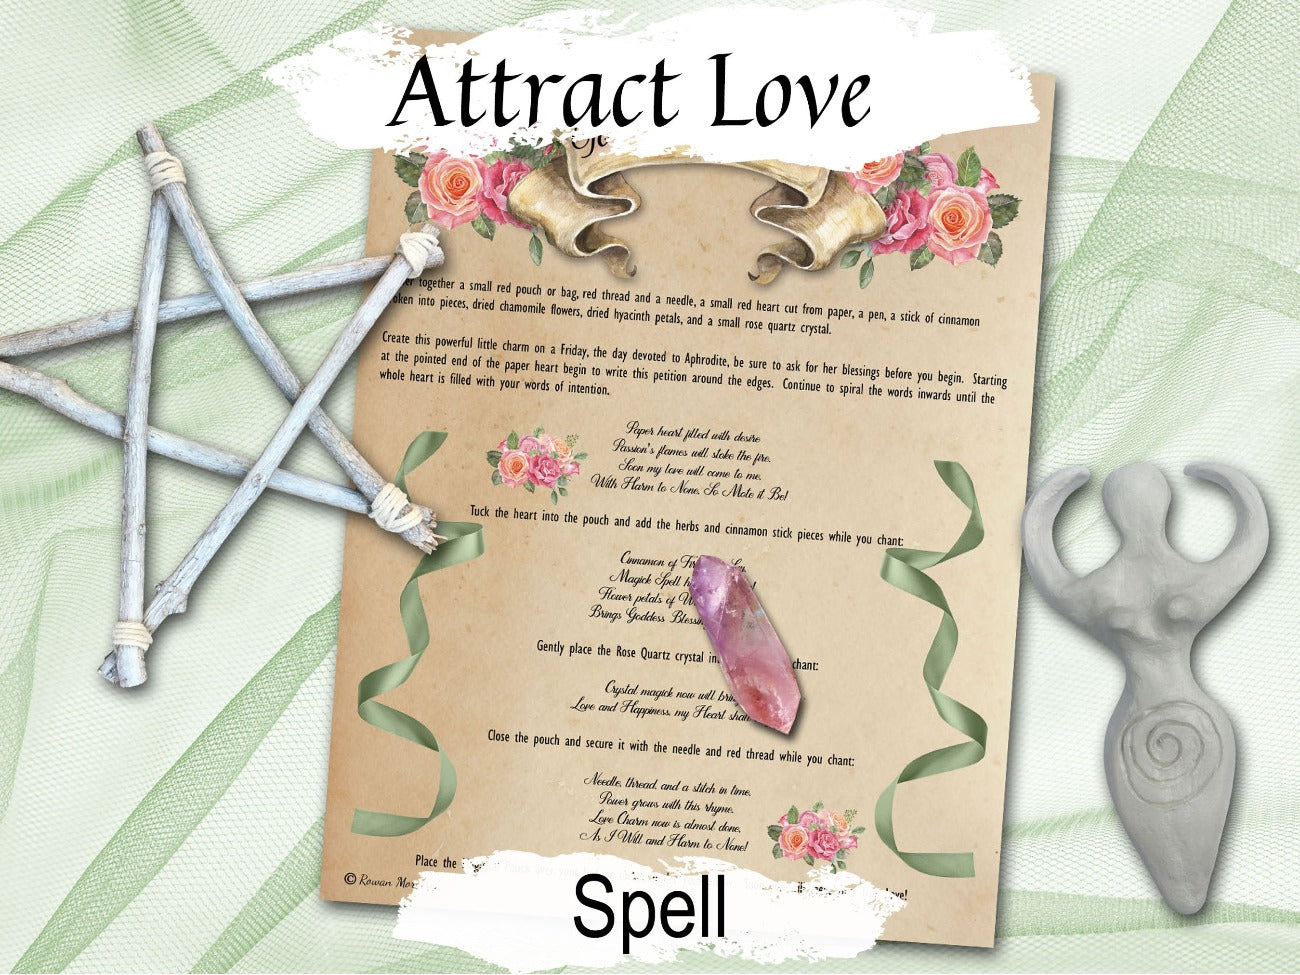 ATTRACT LOVE CHARM Valentines Day Love Spell, Wicca Witchcraft Love Romance, White Magick Find a Lover, Green Witch Herb Apothecary - Morgana Magick Spell